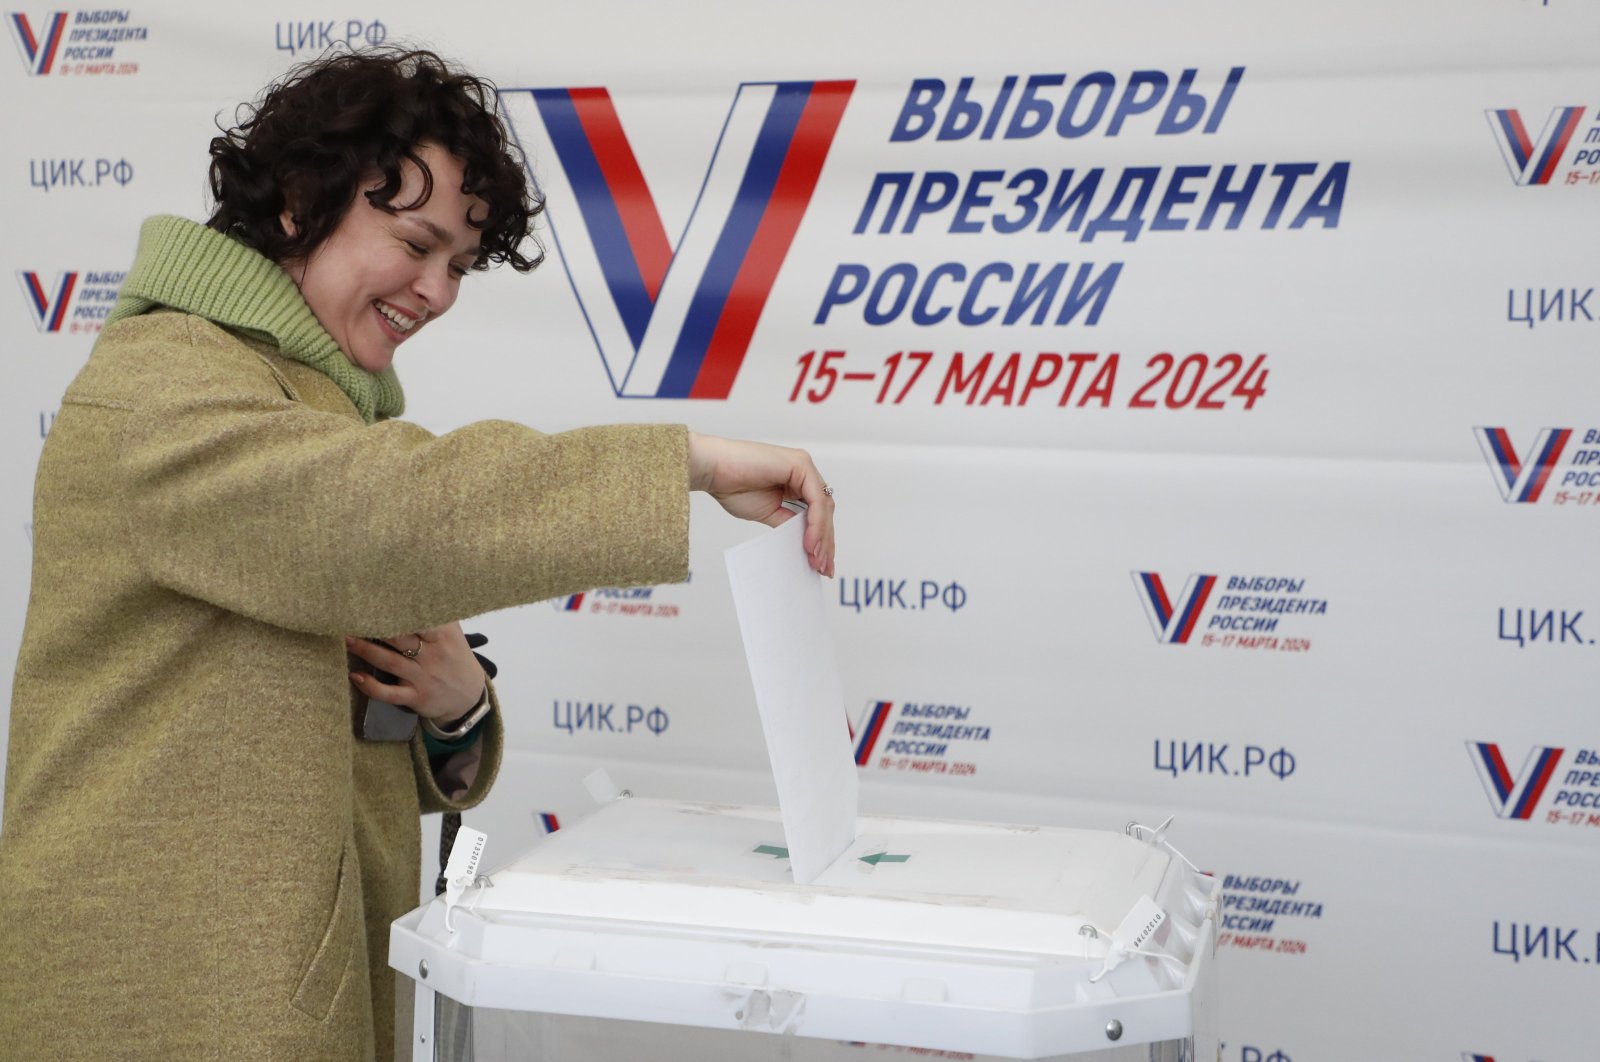 A Russian woman casts her ballot during presidential elections in Moscow, Russia, March 15, 2024. (EPA Photo)